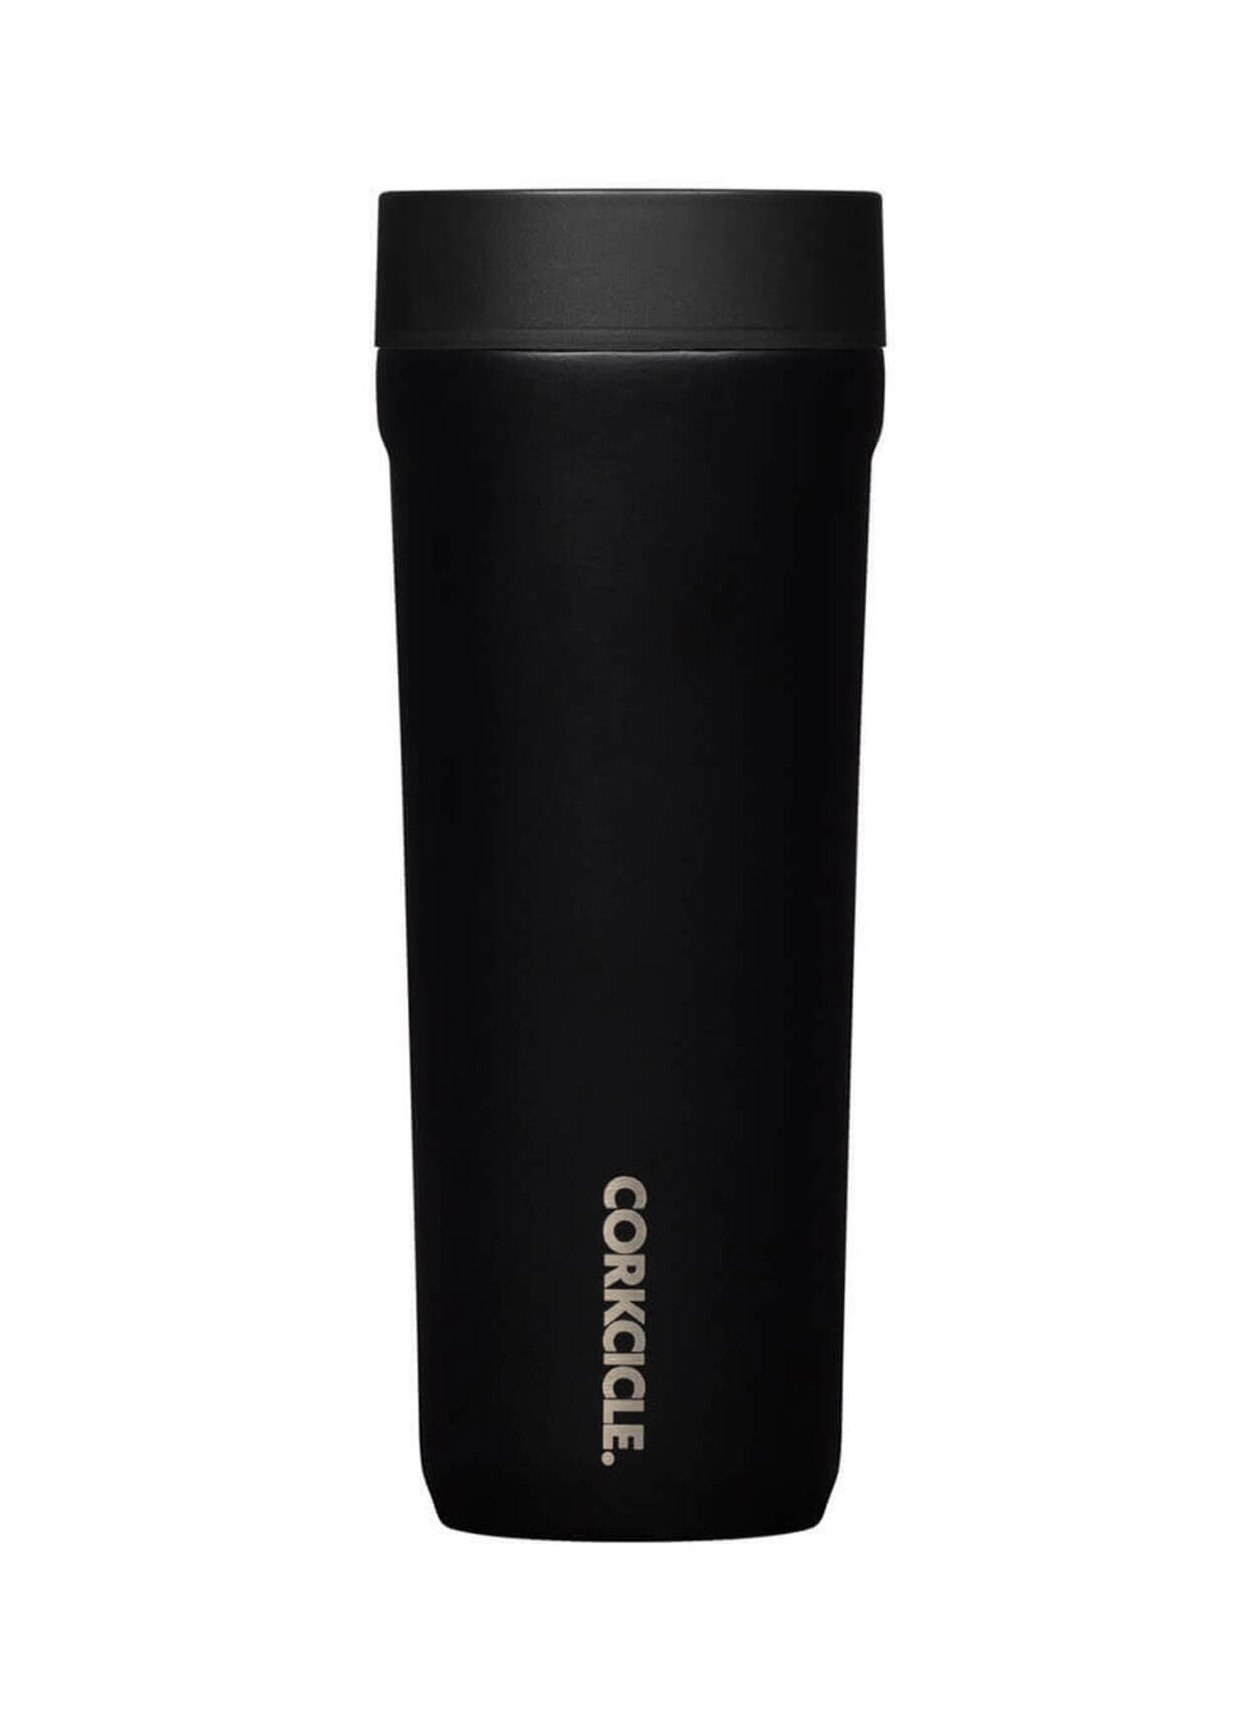 Corkcicle Commuter Cup 17 Oz Insulated Spill Proof Travel Coffee